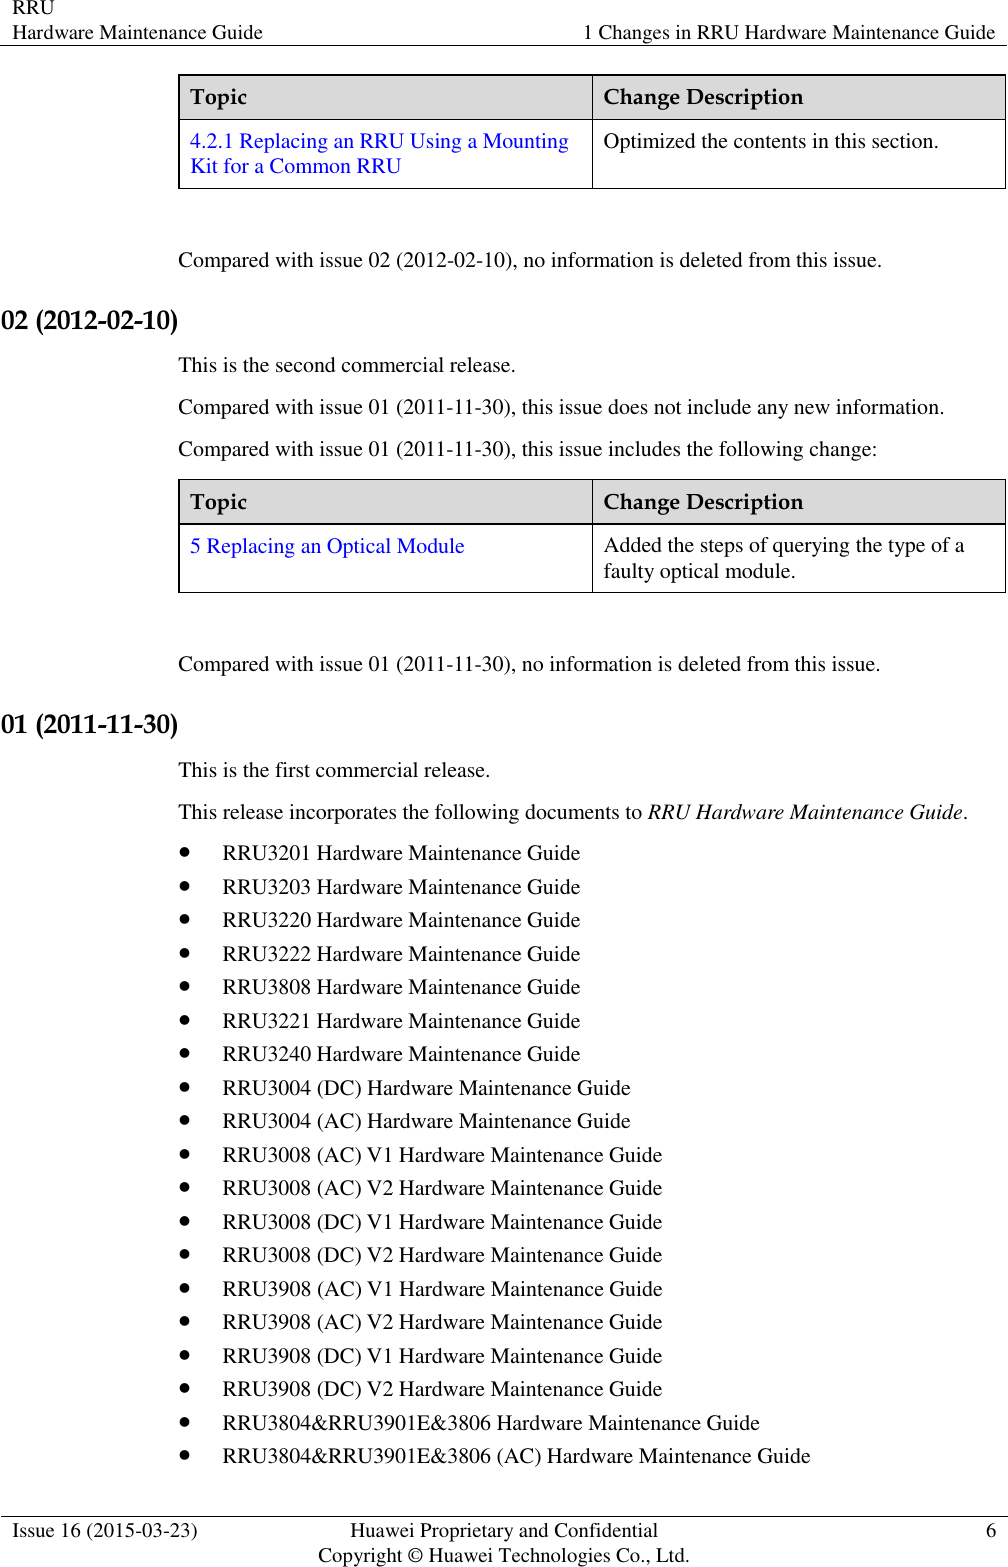 RRU Hardware Maintenance Guide 1 Changes in RRU Hardware Maintenance Guide  Issue 16 (2015-03-23) Huawei Proprietary and Confidential                                     Copyright © Huawei Technologies Co., Ltd. 6  Topic Change Description 4.2.1 Replacing an RRU Using a Mounting Kit for a Common RRU Optimized the contents in this section.  Compared with issue 02 (2012-02-10), no information is deleted from this issue. 02 (2012-02-10) This is the second commercial release. Compared with issue 01 (2011-11-30), this issue does not include any new information. Compared with issue 01 (2011-11-30), this issue includes the following change: Topic Change Description 5 Replacing an Optical Module Added the steps of querying the type of a faulty optical module.  Compared with issue 01 (2011-11-30), no information is deleted from this issue. 01 (2011-11-30) This is the first commercial release. This release incorporates the following documents to RRU Hardware Maintenance Guide.  RRU3201 Hardware Maintenance Guide  RRU3203 Hardware Maintenance Guide  RRU3220 Hardware Maintenance Guide  RRU3222 Hardware Maintenance Guide  RRU3808 Hardware Maintenance Guide  RRU3221 Hardware Maintenance Guide  RRU3240 Hardware Maintenance Guide  RRU3004 (DC) Hardware Maintenance Guide  RRU3004 (AC) Hardware Maintenance Guide  RRU3008 (AC) V1 Hardware Maintenance Guide  RRU3008 (AC) V2 Hardware Maintenance Guide  RRU3008 (DC) V1 Hardware Maintenance Guide  RRU3008 (DC) V2 Hardware Maintenance Guide  RRU3908 (AC) V1 Hardware Maintenance Guide  RRU3908 (AC) V2 Hardware Maintenance Guide  RRU3908 (DC) V1 Hardware Maintenance Guide  RRU3908 (DC) V2 Hardware Maintenance Guide  RRU3804&amp;RRU3901E&amp;3806 Hardware Maintenance Guide  RRU3804&amp;RRU3901E&amp;3806 (AC) Hardware Maintenance Guide 